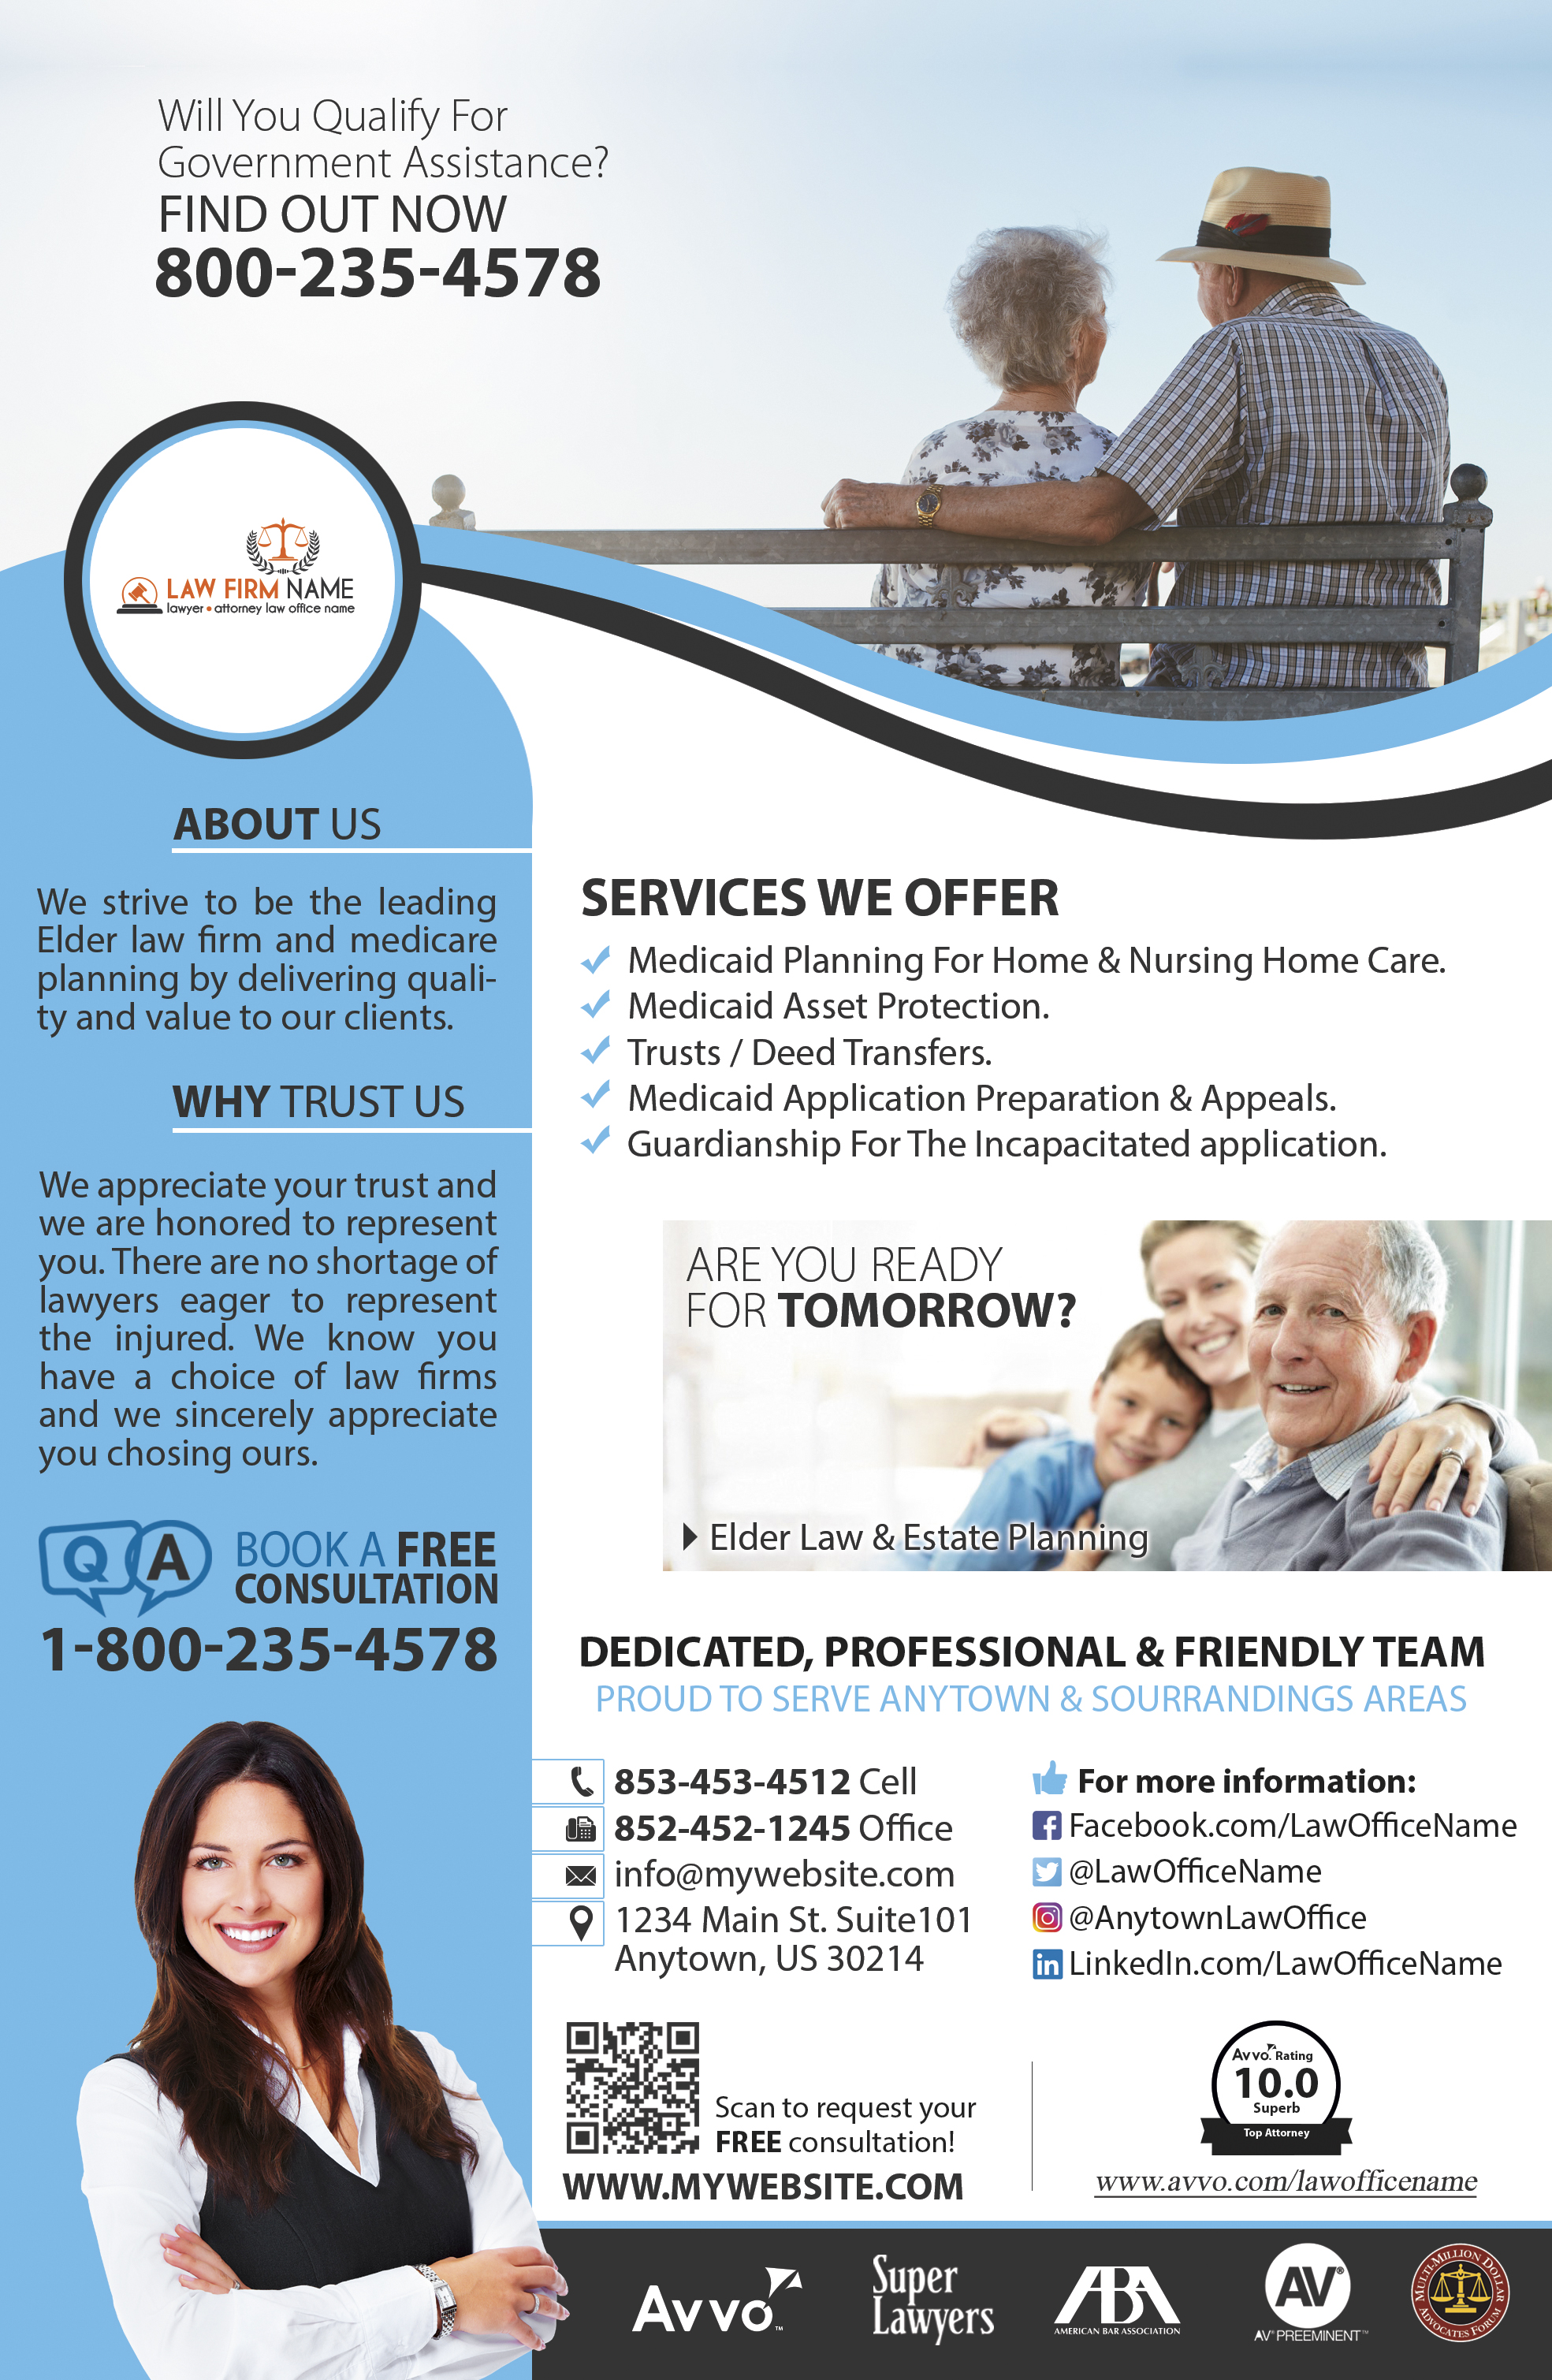 Elder Law Flyers, Medicaid Flyers, Personal Injury Flyers, Lawyer Flyers, Law Firm Flyers, Attorney Flyers, Legal Flyers, Law Office Flyers